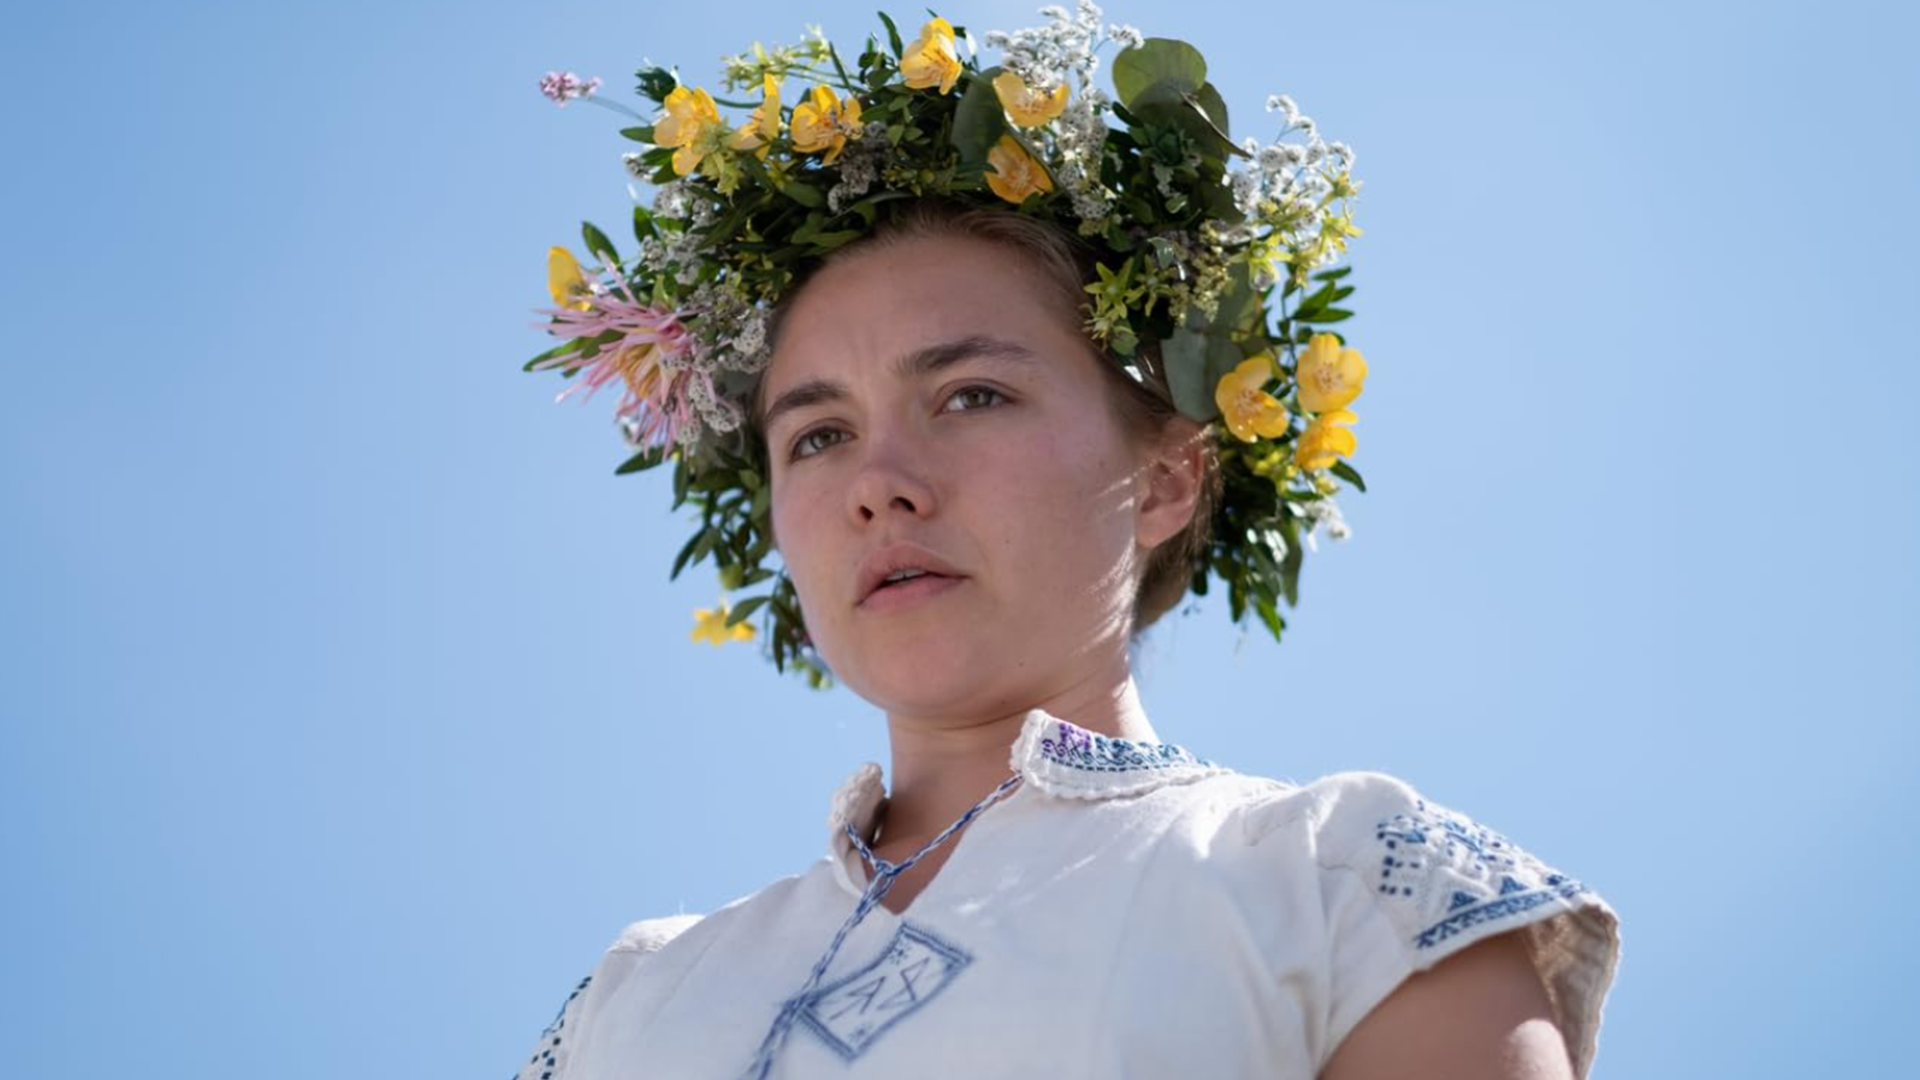 A young woman wears a flower crown in this image from A24.